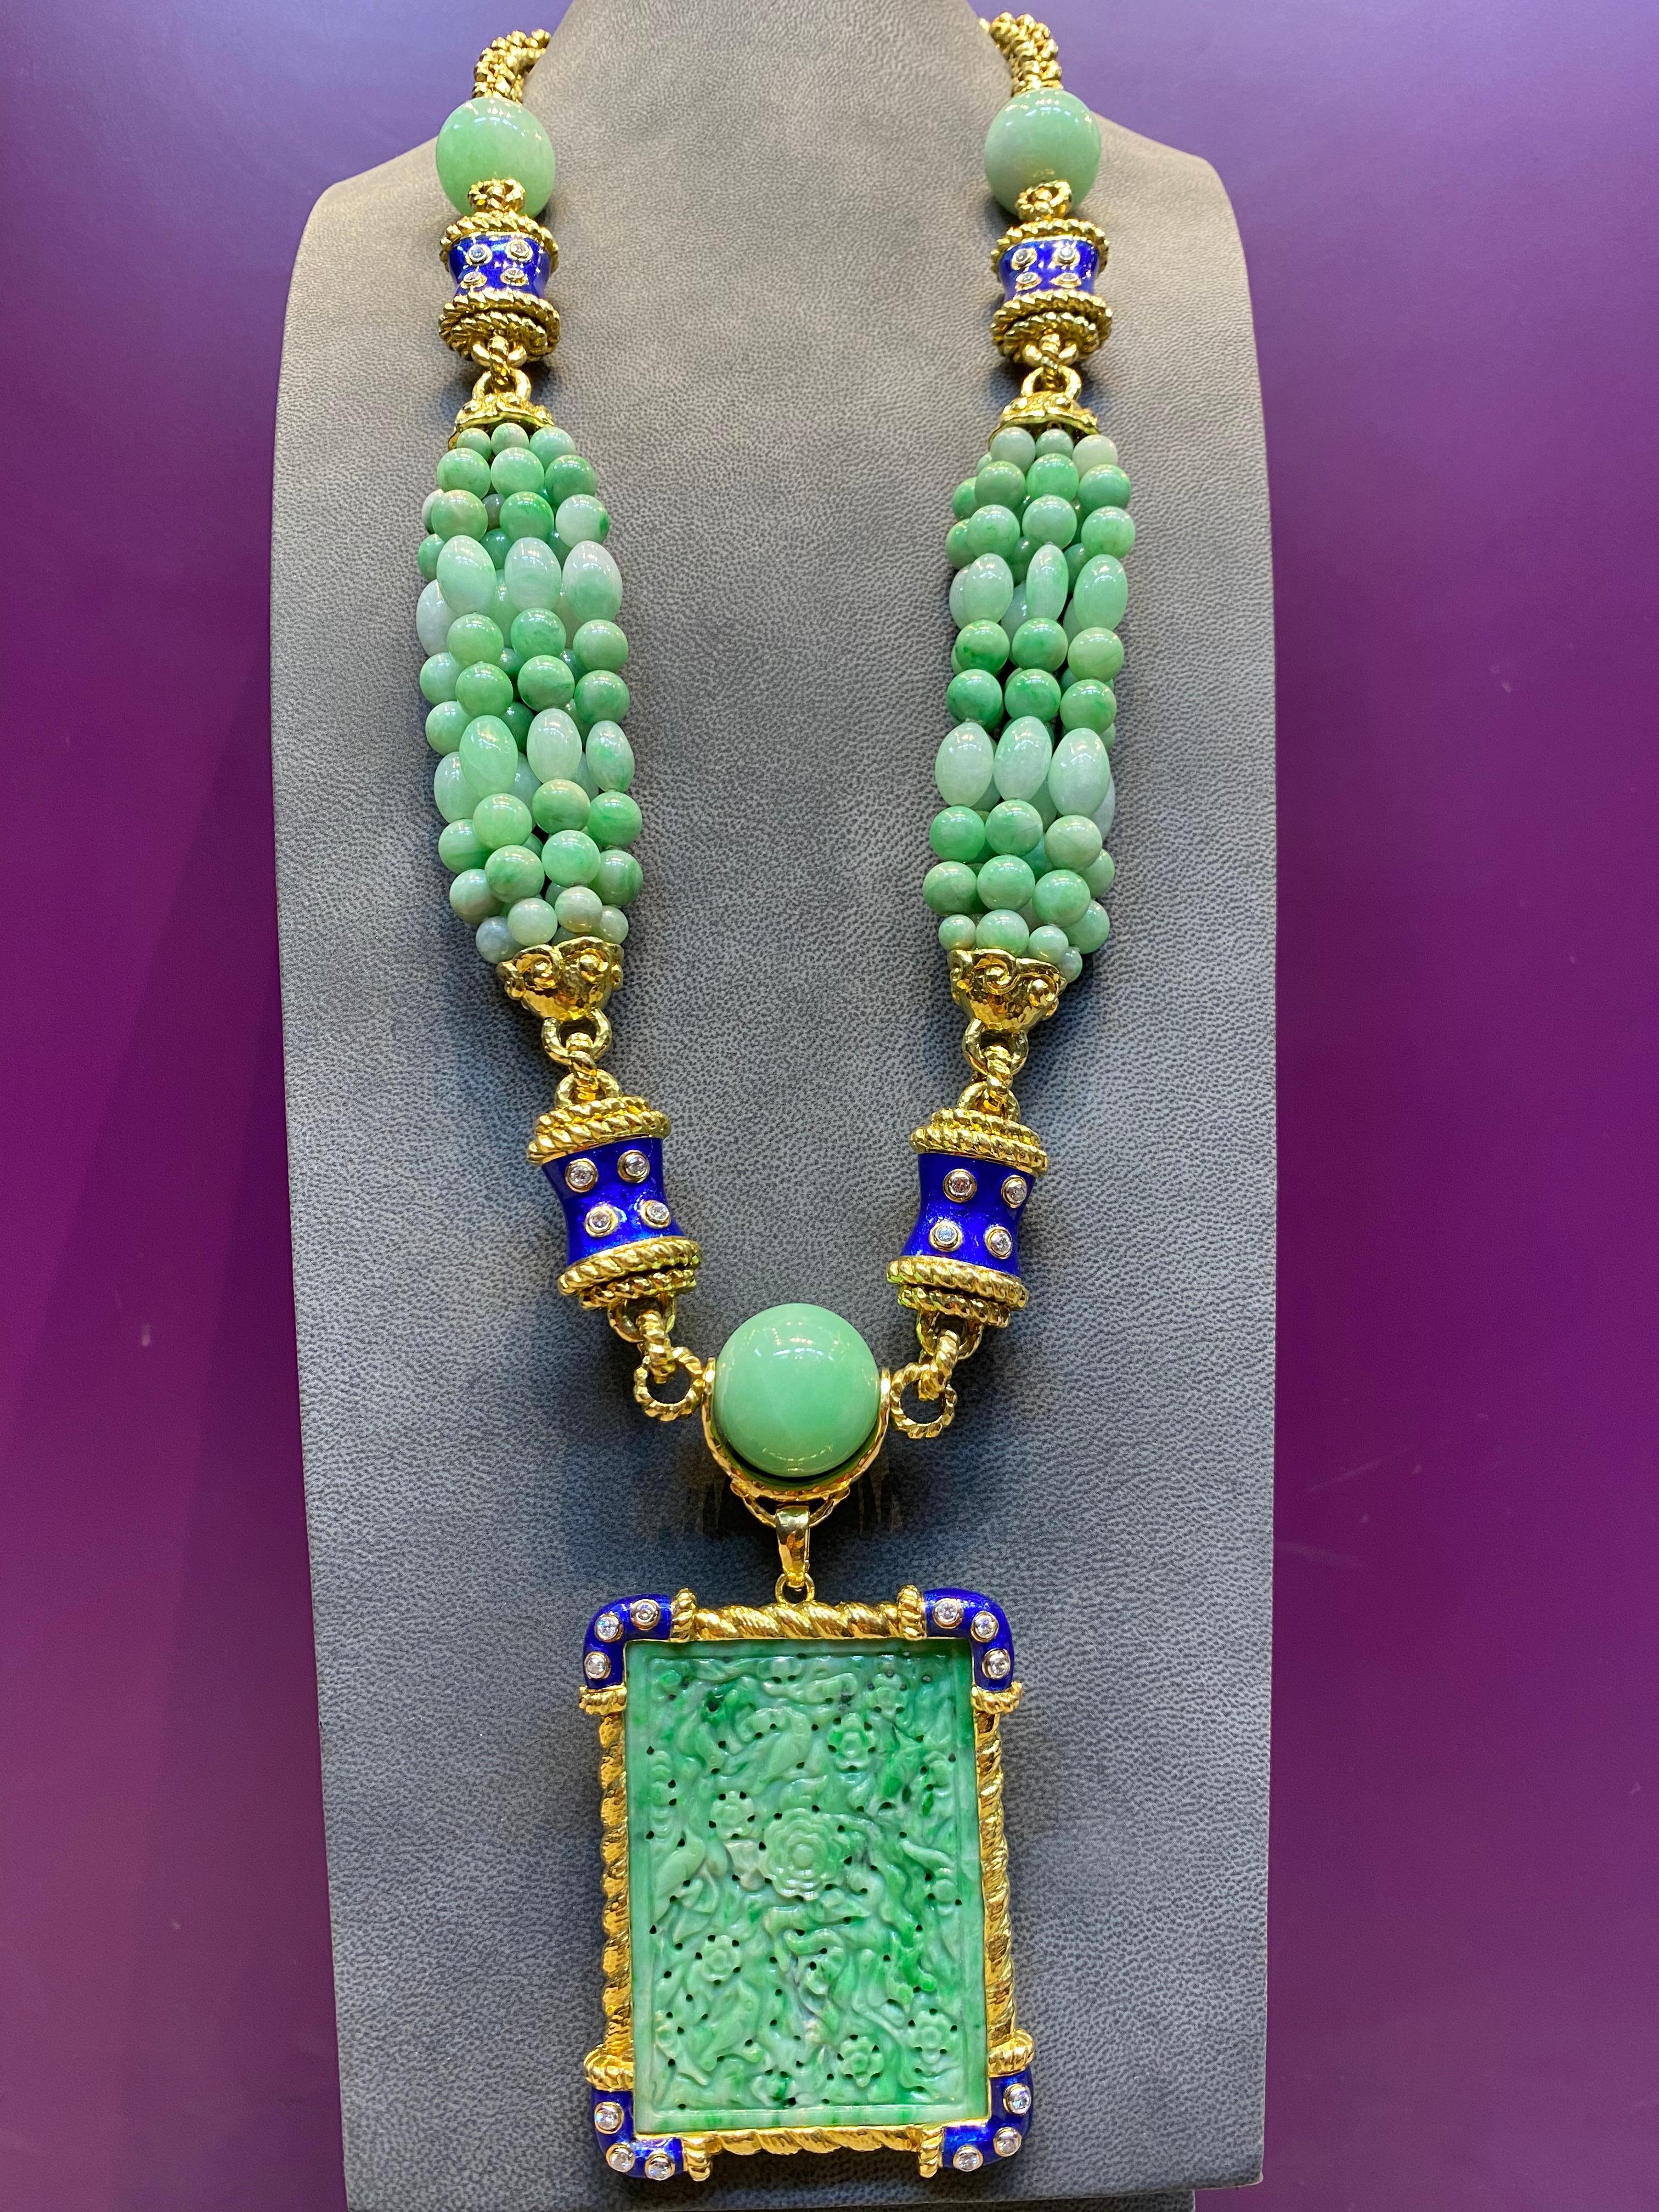 David Webb Jade, Diamond & Enamel Necklace set in 18K Yellow Gold & Platinum with detachable rectangular Jade pendant to be worn two ways. Six strands of jade beads & 3 larger beads attached to a 18k rope & blue enamel link.
Necklace Length: